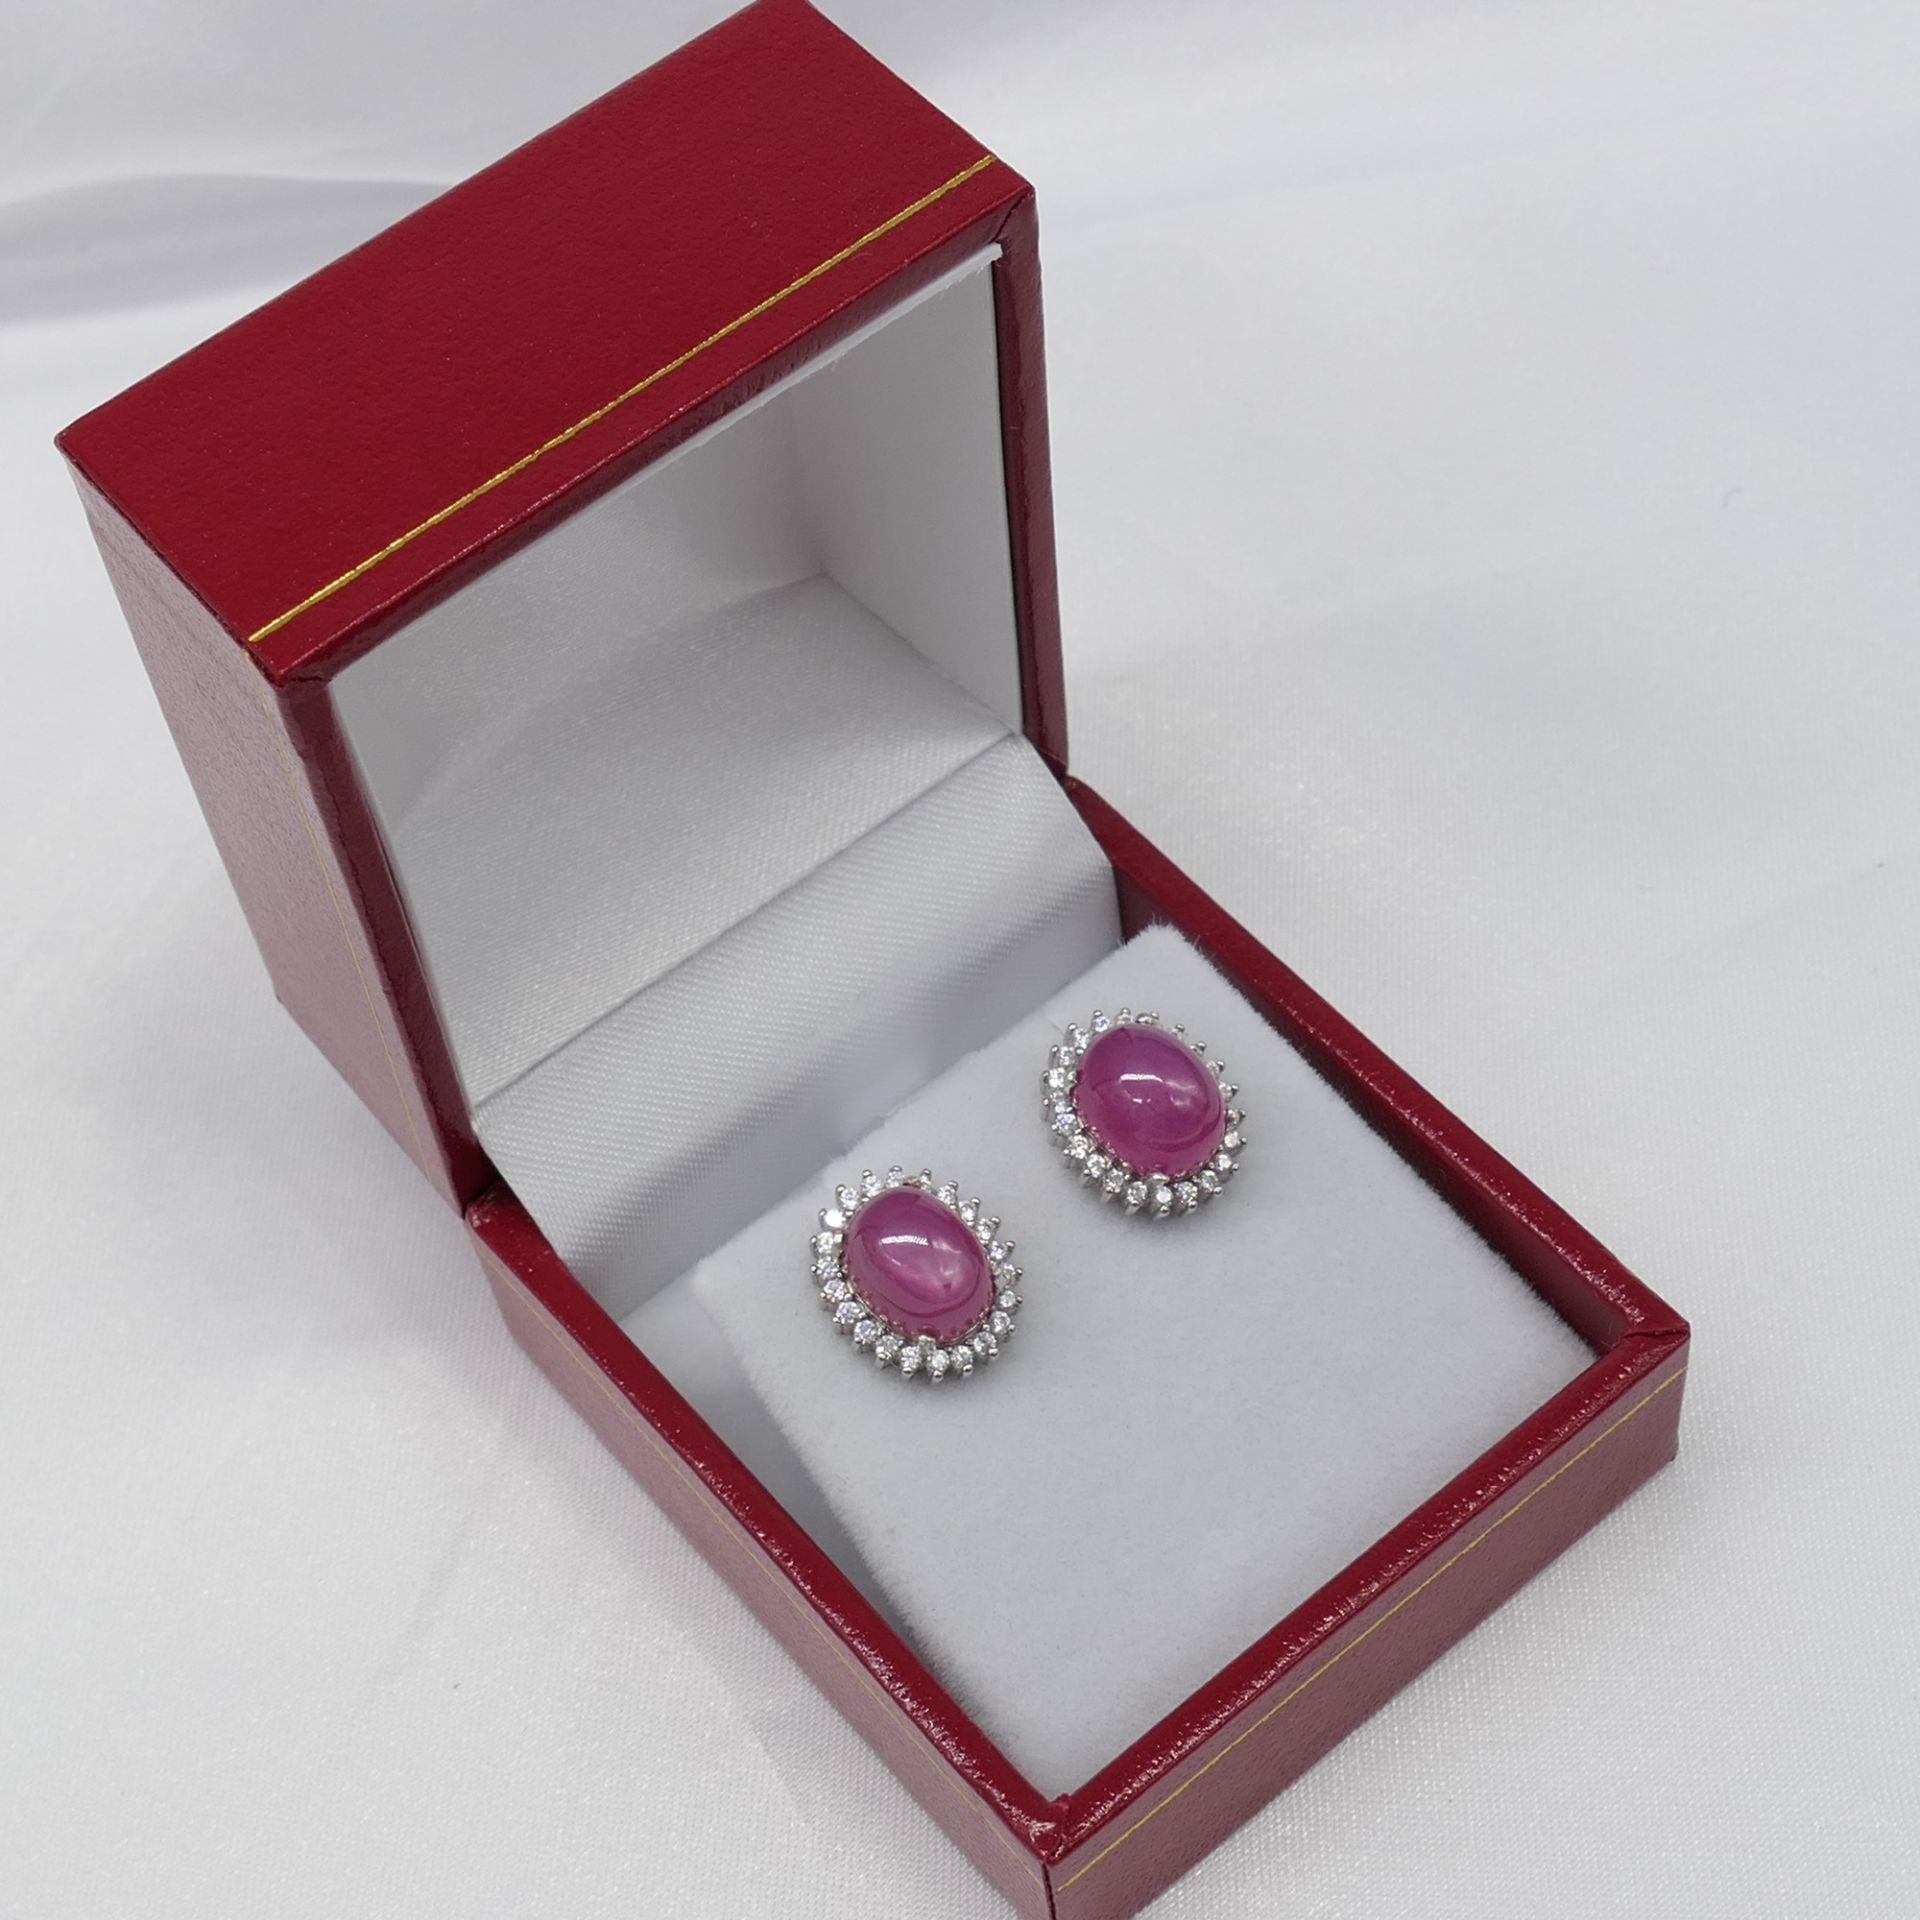 Cabochon Ruby Ear Studs In Sterling Silver, Boxed - Image 5 of 7